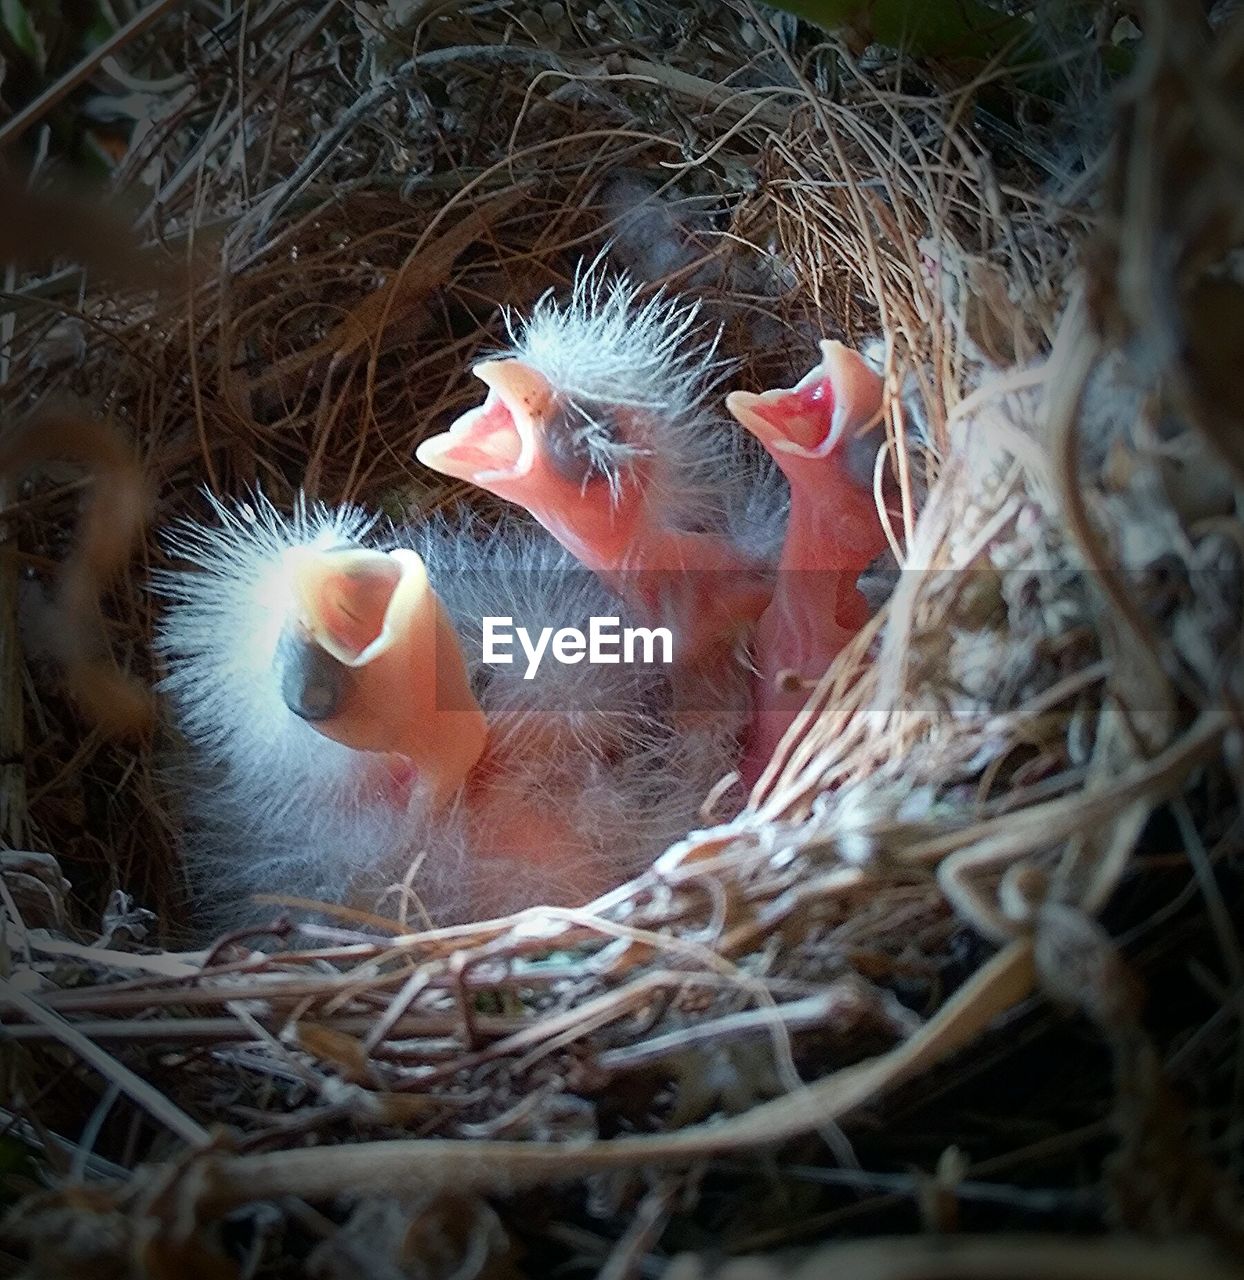 Baby house finches in0nest